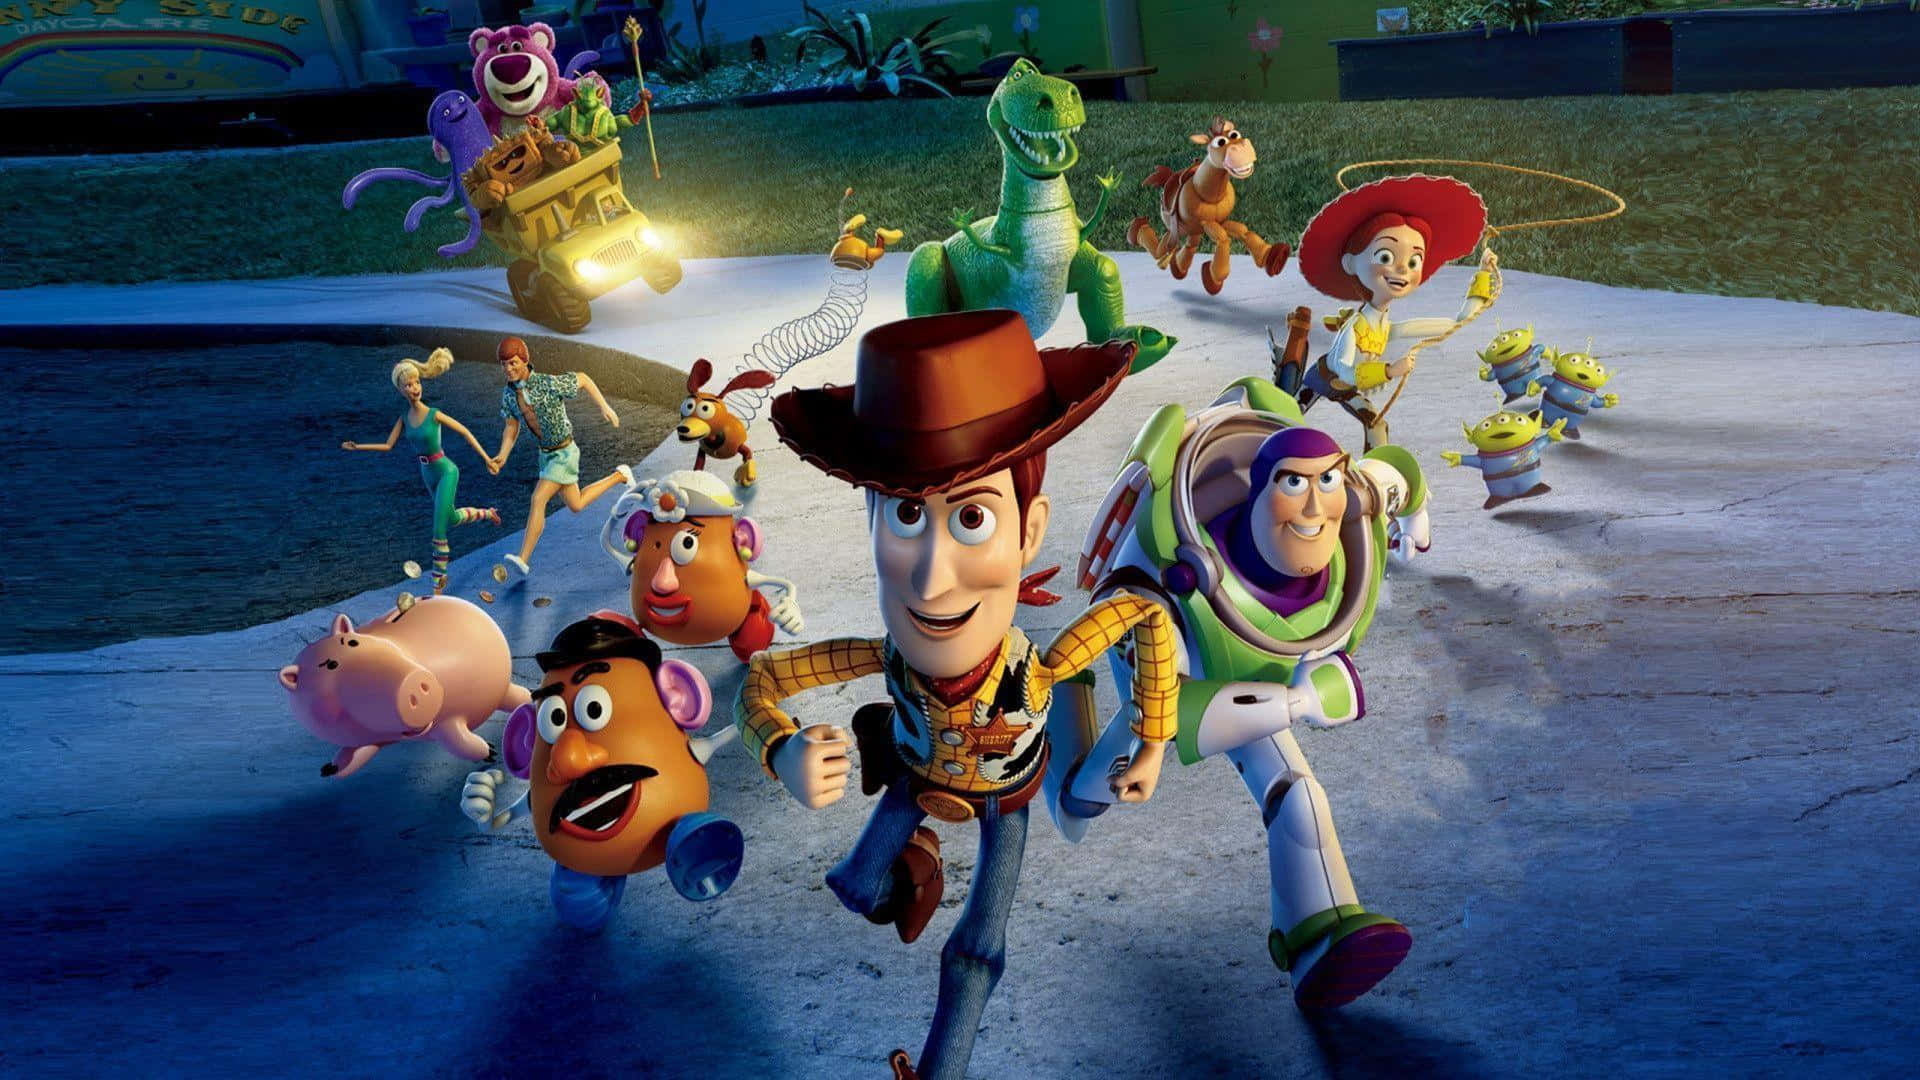 Best Disney Background Characters Of Toy Story 3